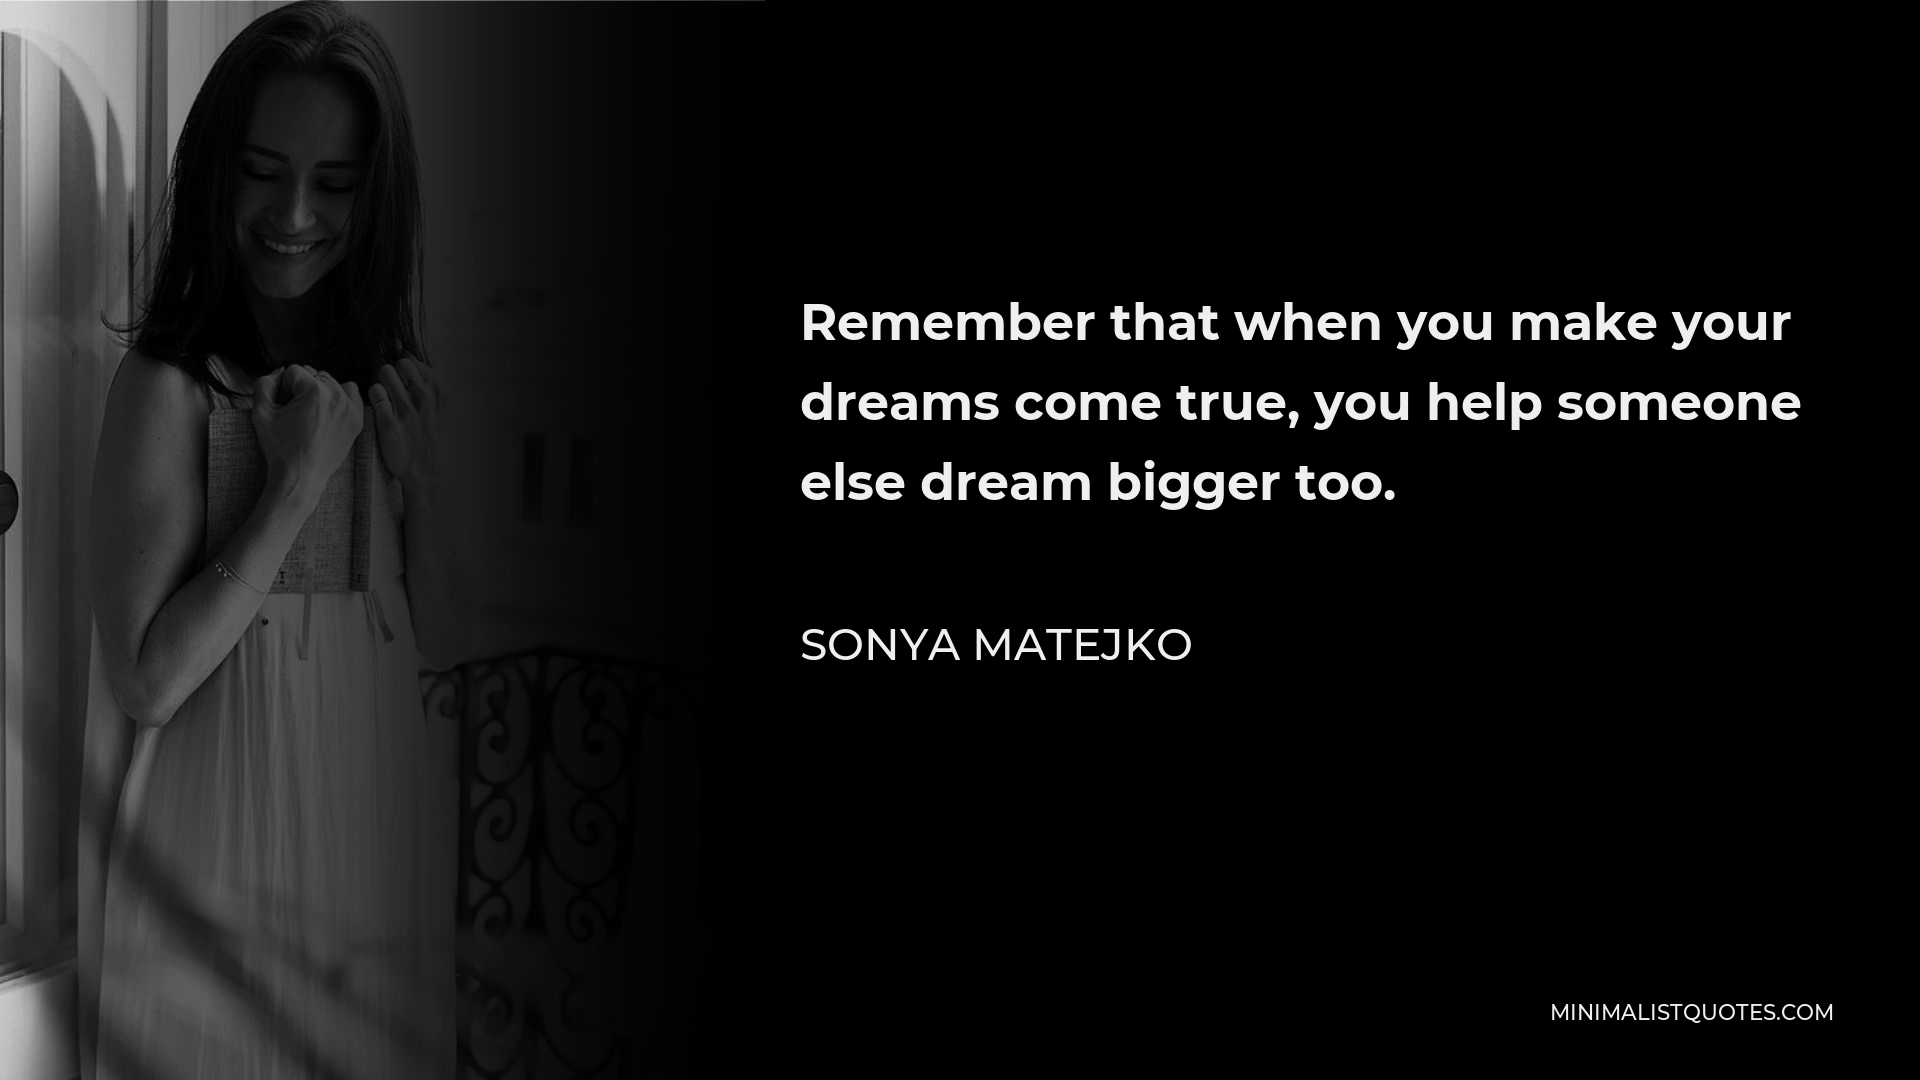 Sonya Matejko Quote - Remember that when you make your dreams come true, you help someone else dream bigger too.